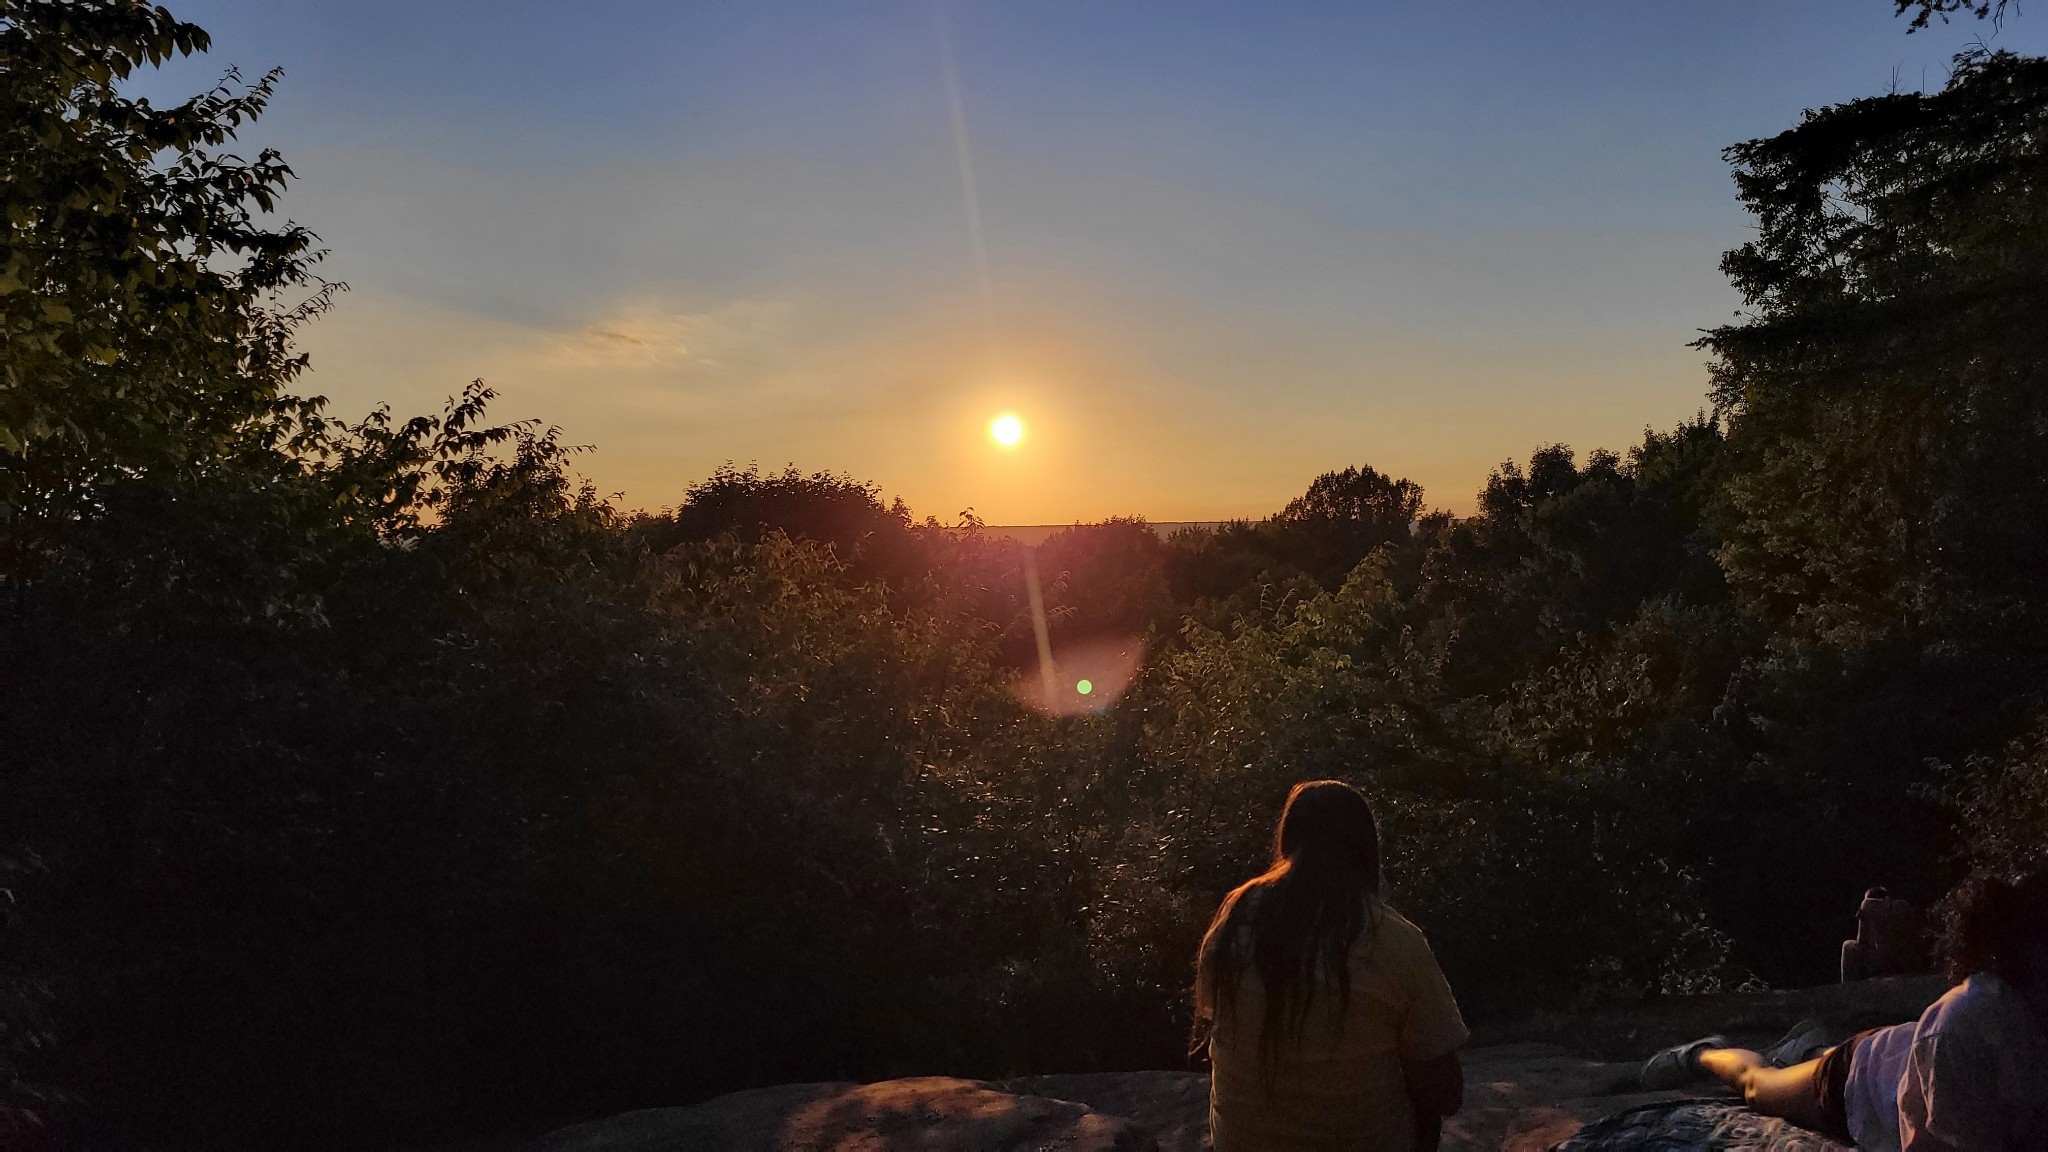 katiiie-lynn:Impromptu date night evening hike in the CVNP to watch the sunset from